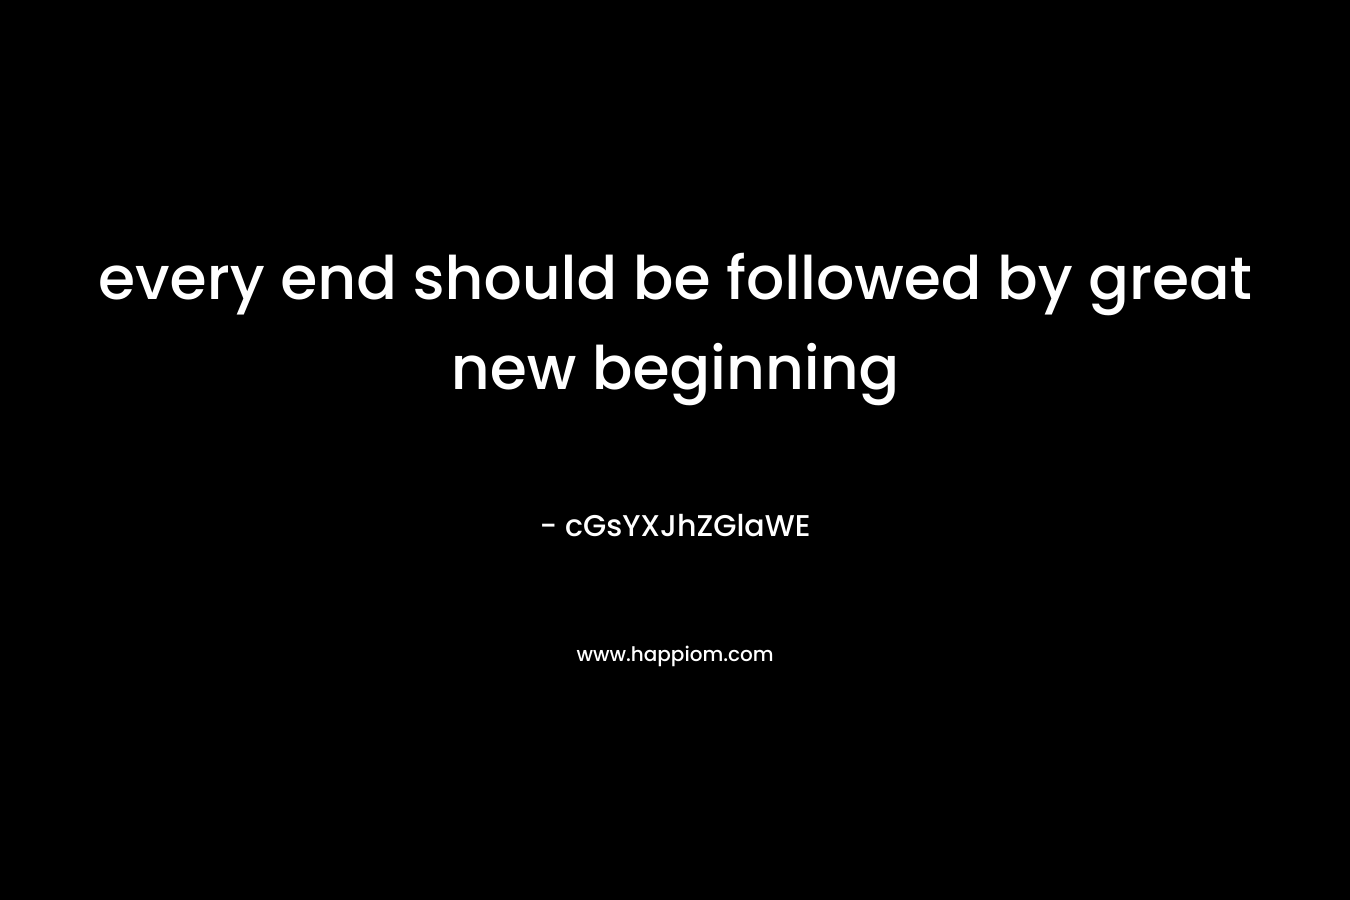 every end should be followed by great new beginning